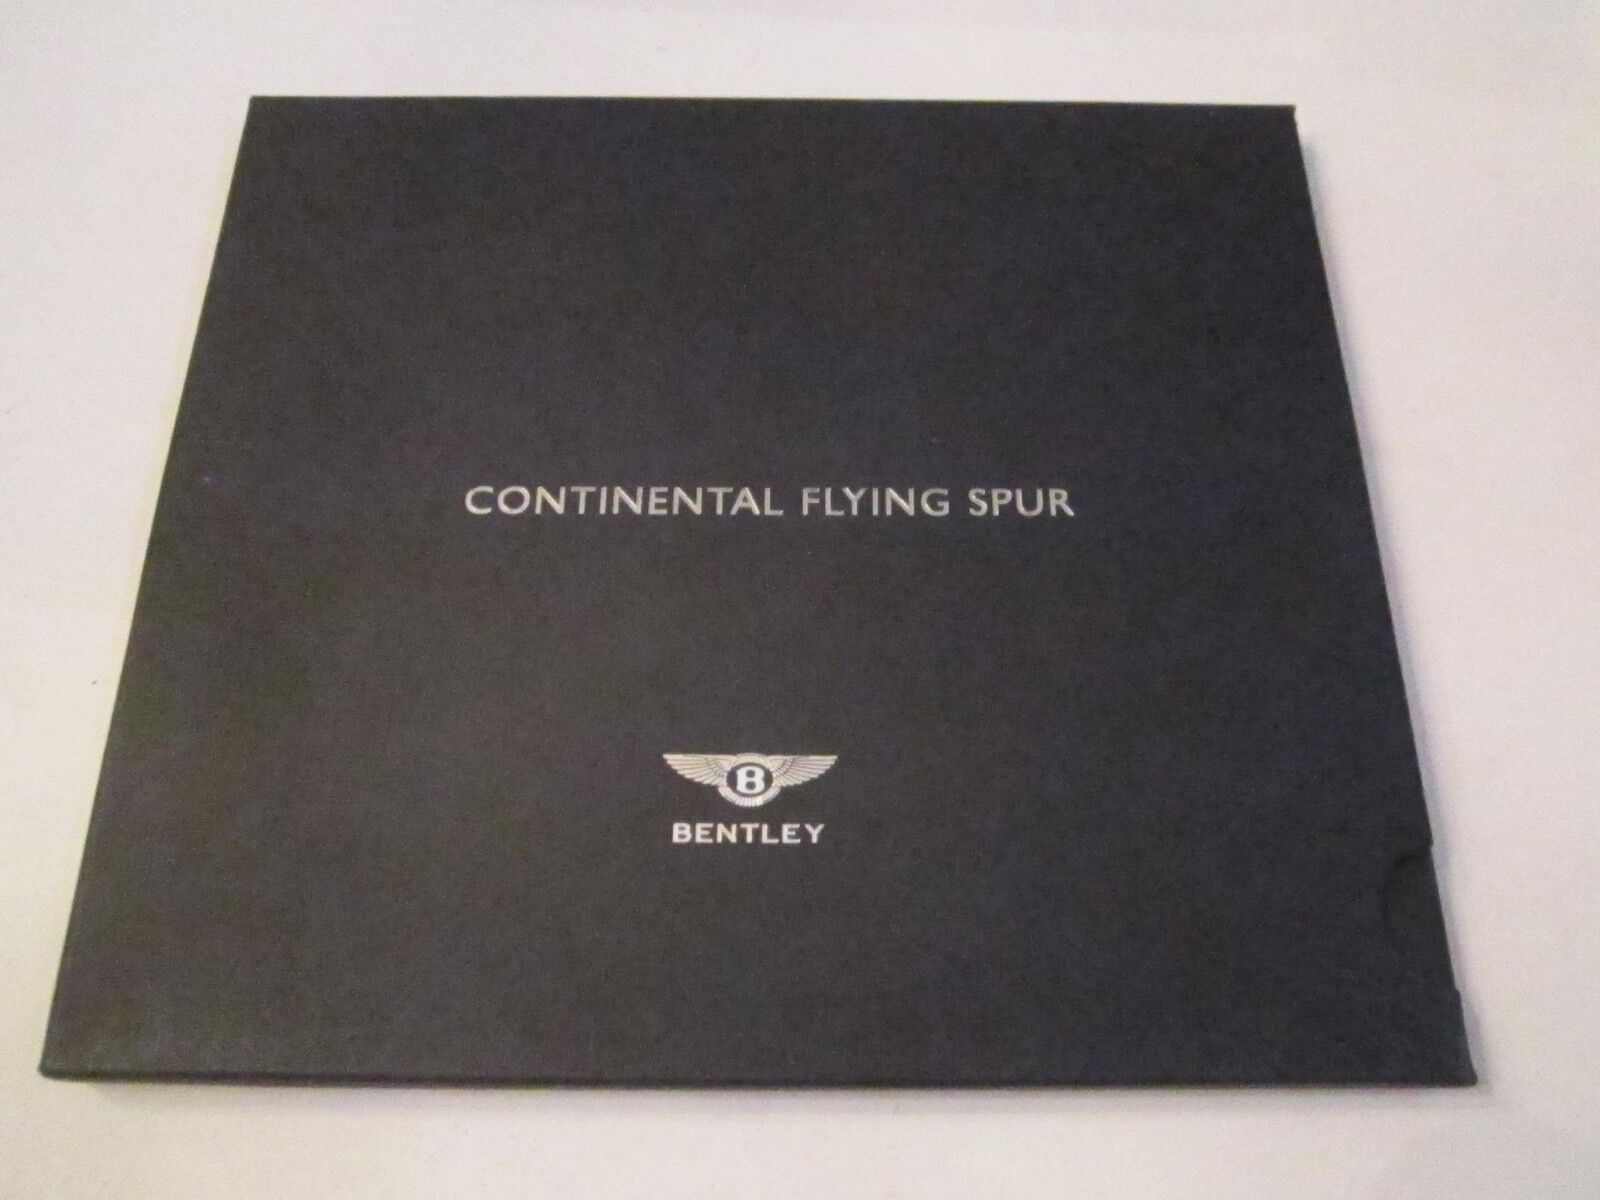 2005 BENTLEY CONTINENTAL FLYING SPUR BROCHURE - THICK BOOKLET - TUB MP1